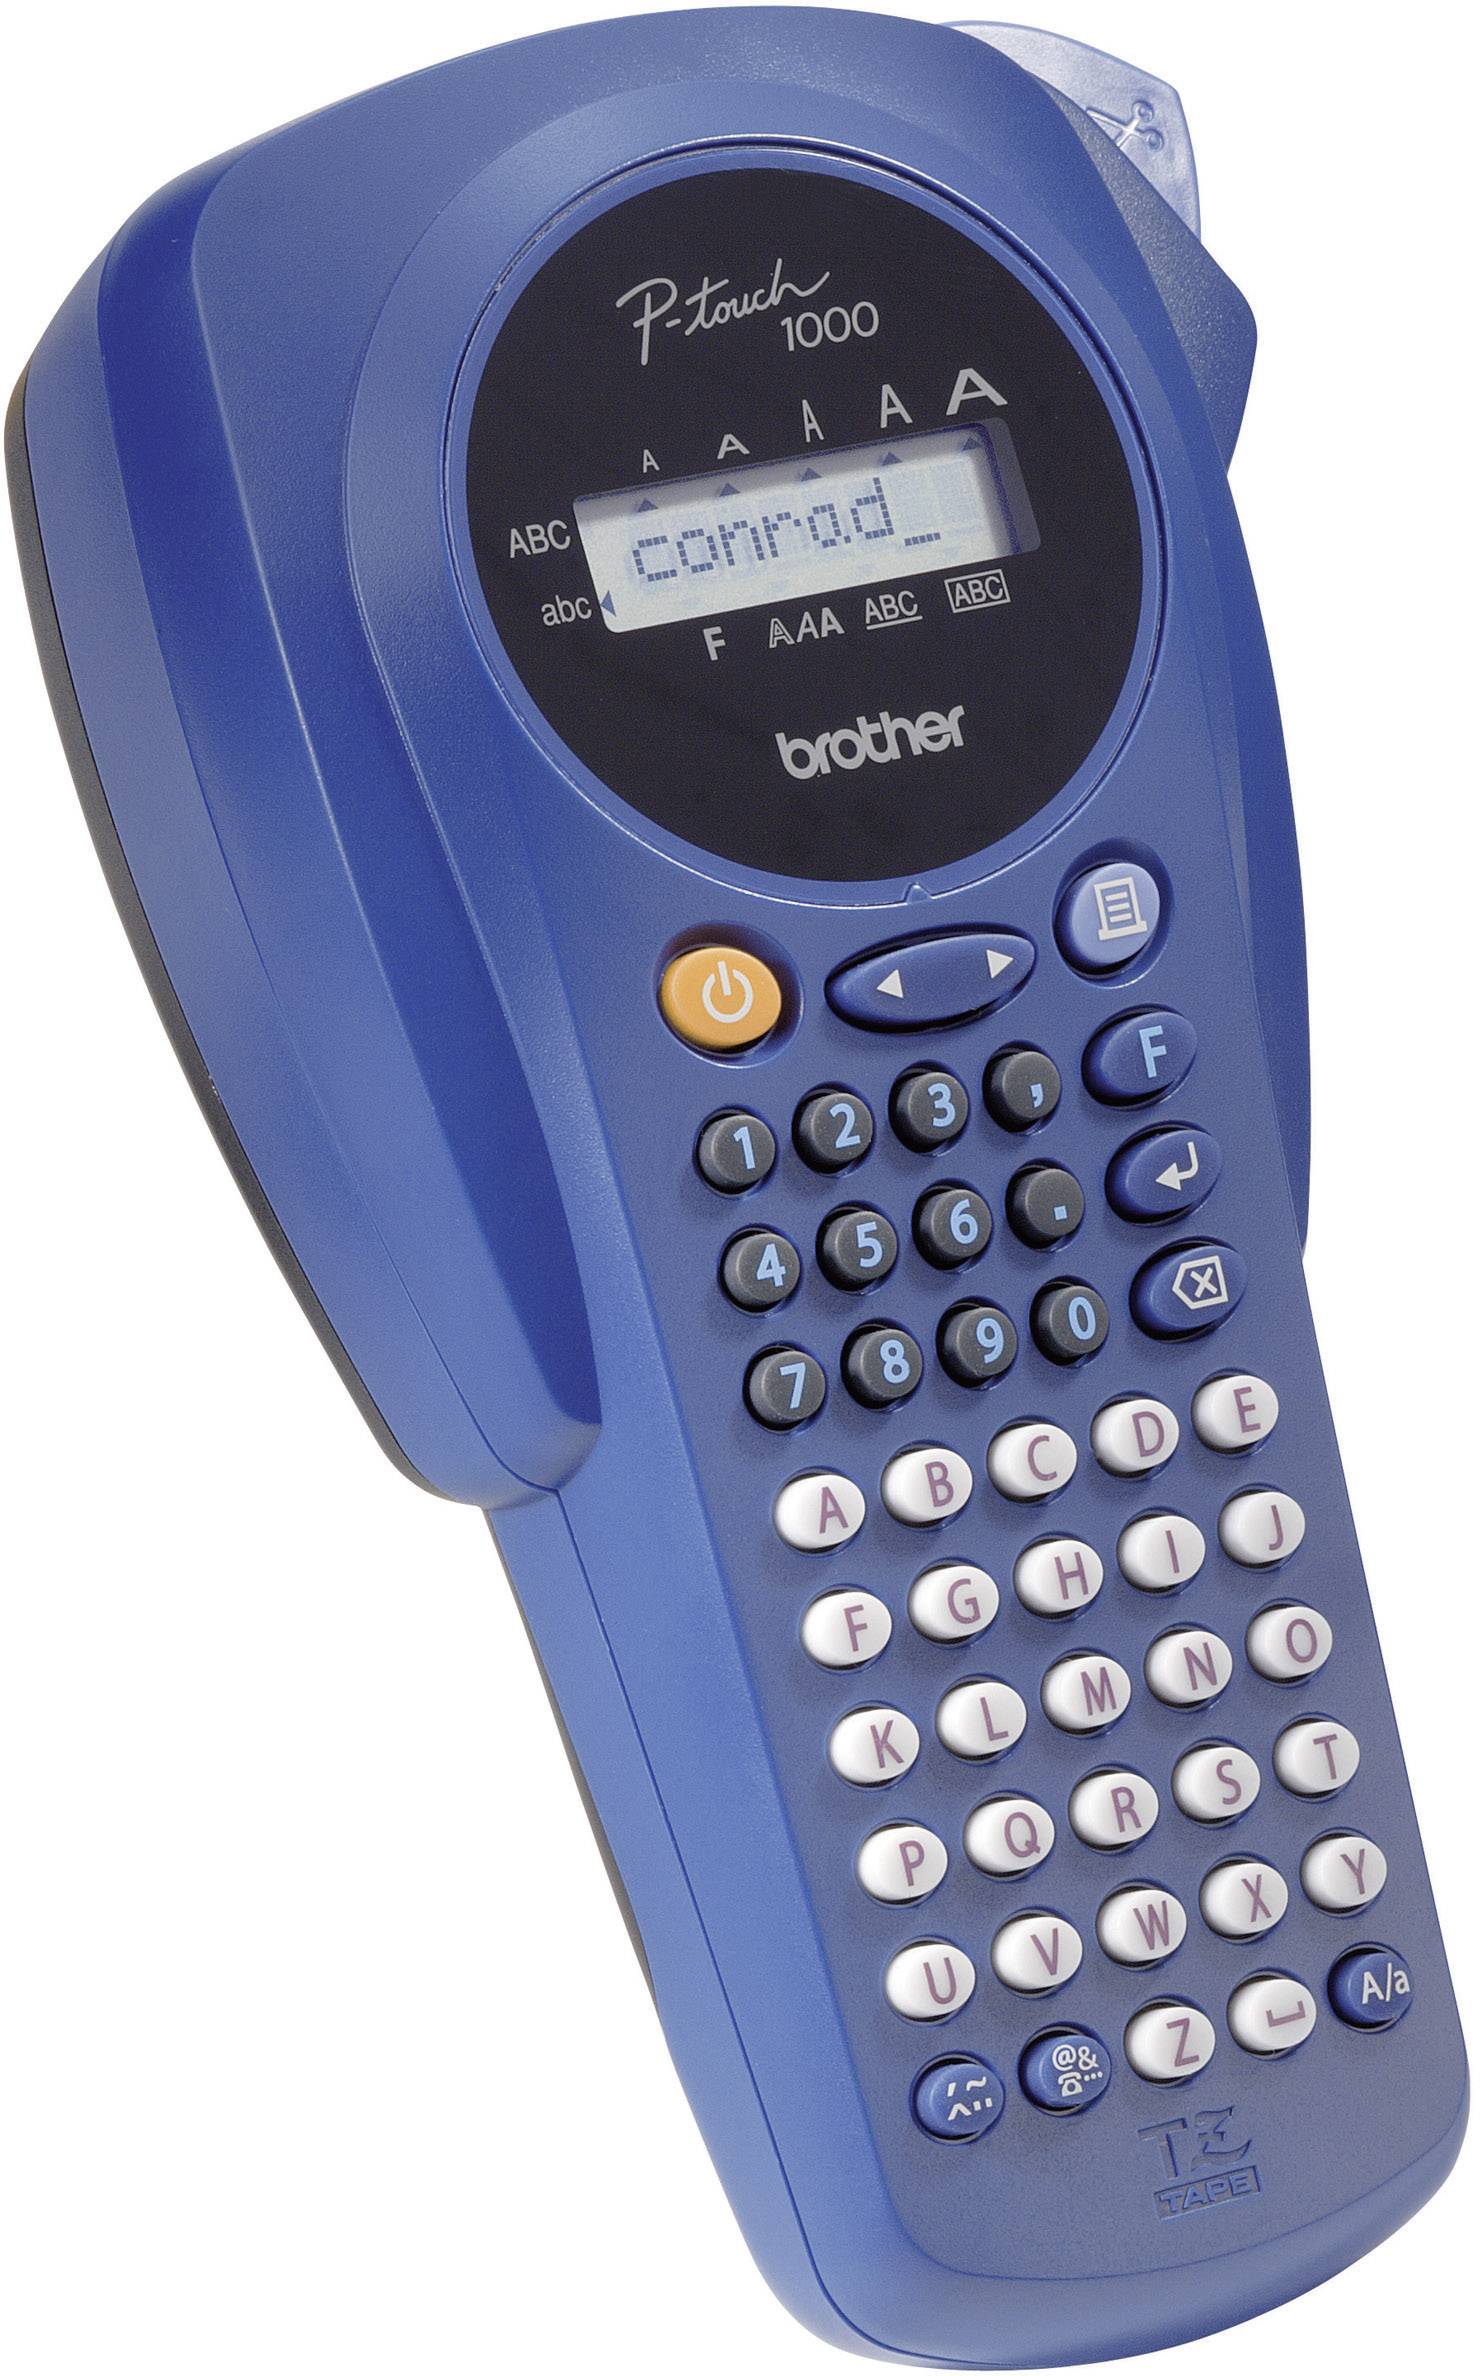 brother p touch label maker